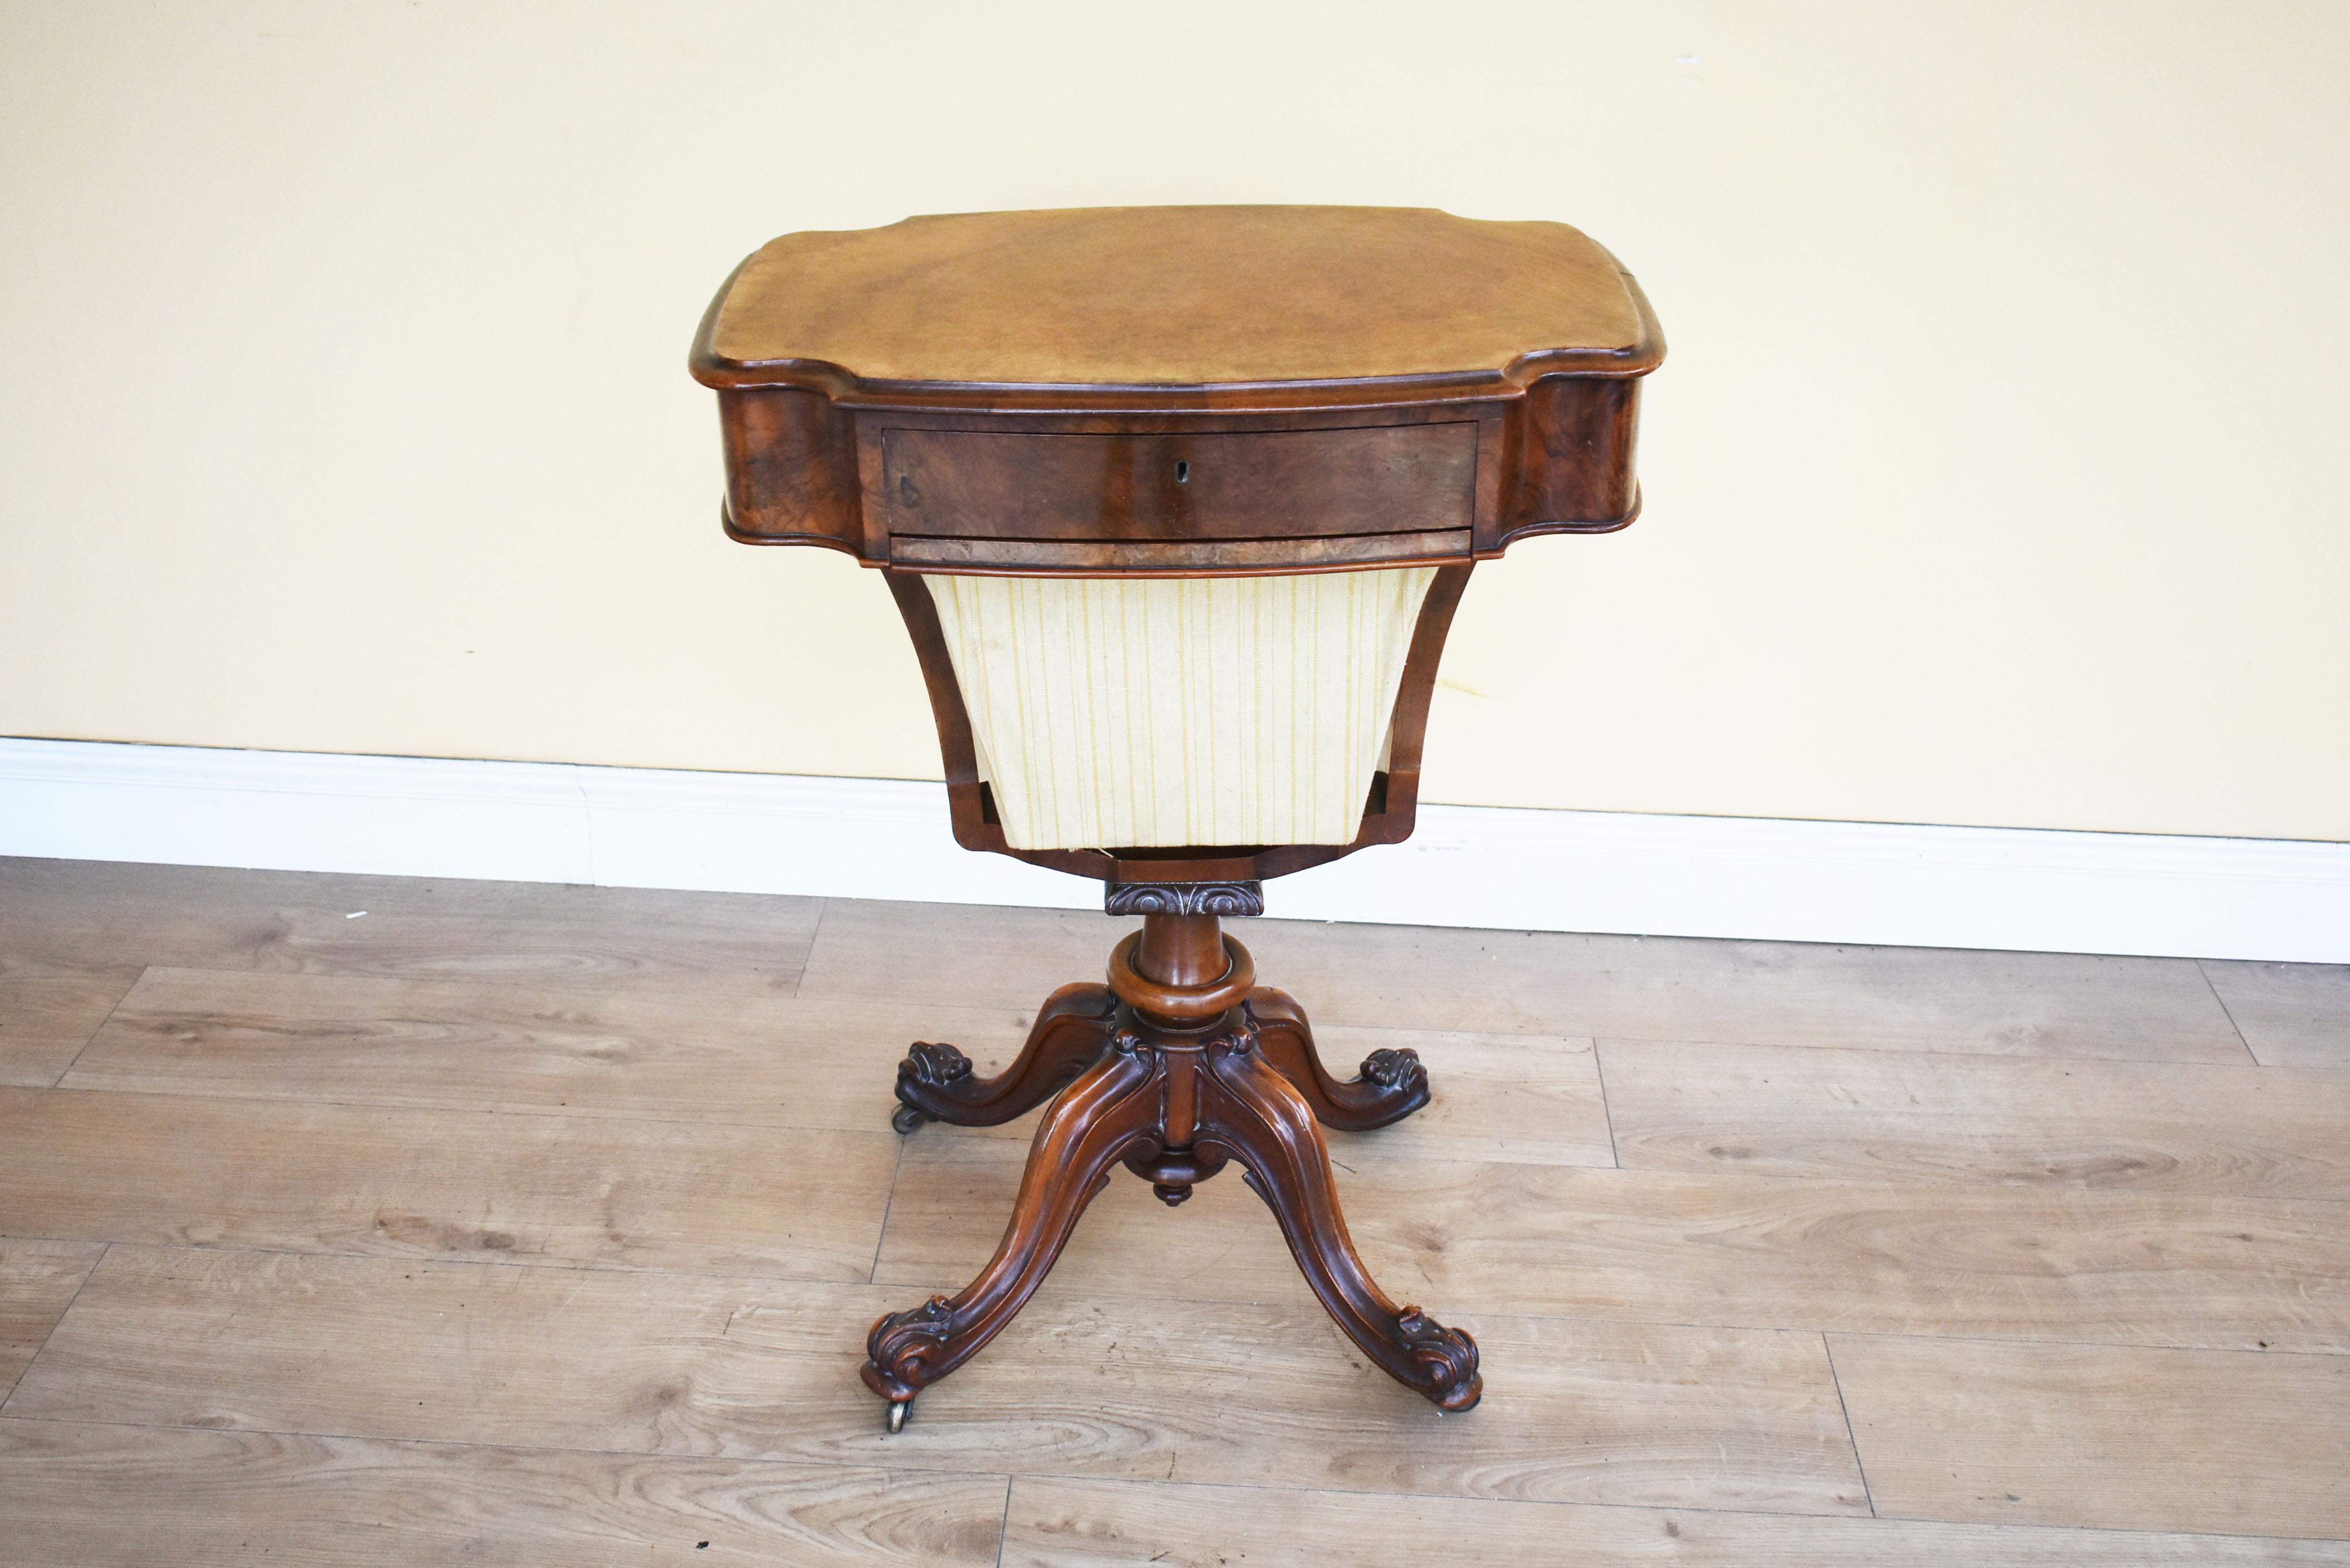 For sale is a good quality 19th century Victorian burr walnut work table, having a single drawer in the top above a pullout / pull-out basket. Standing on four elegantly shaped legs, this piece is in good condition, having minor wear commensurate